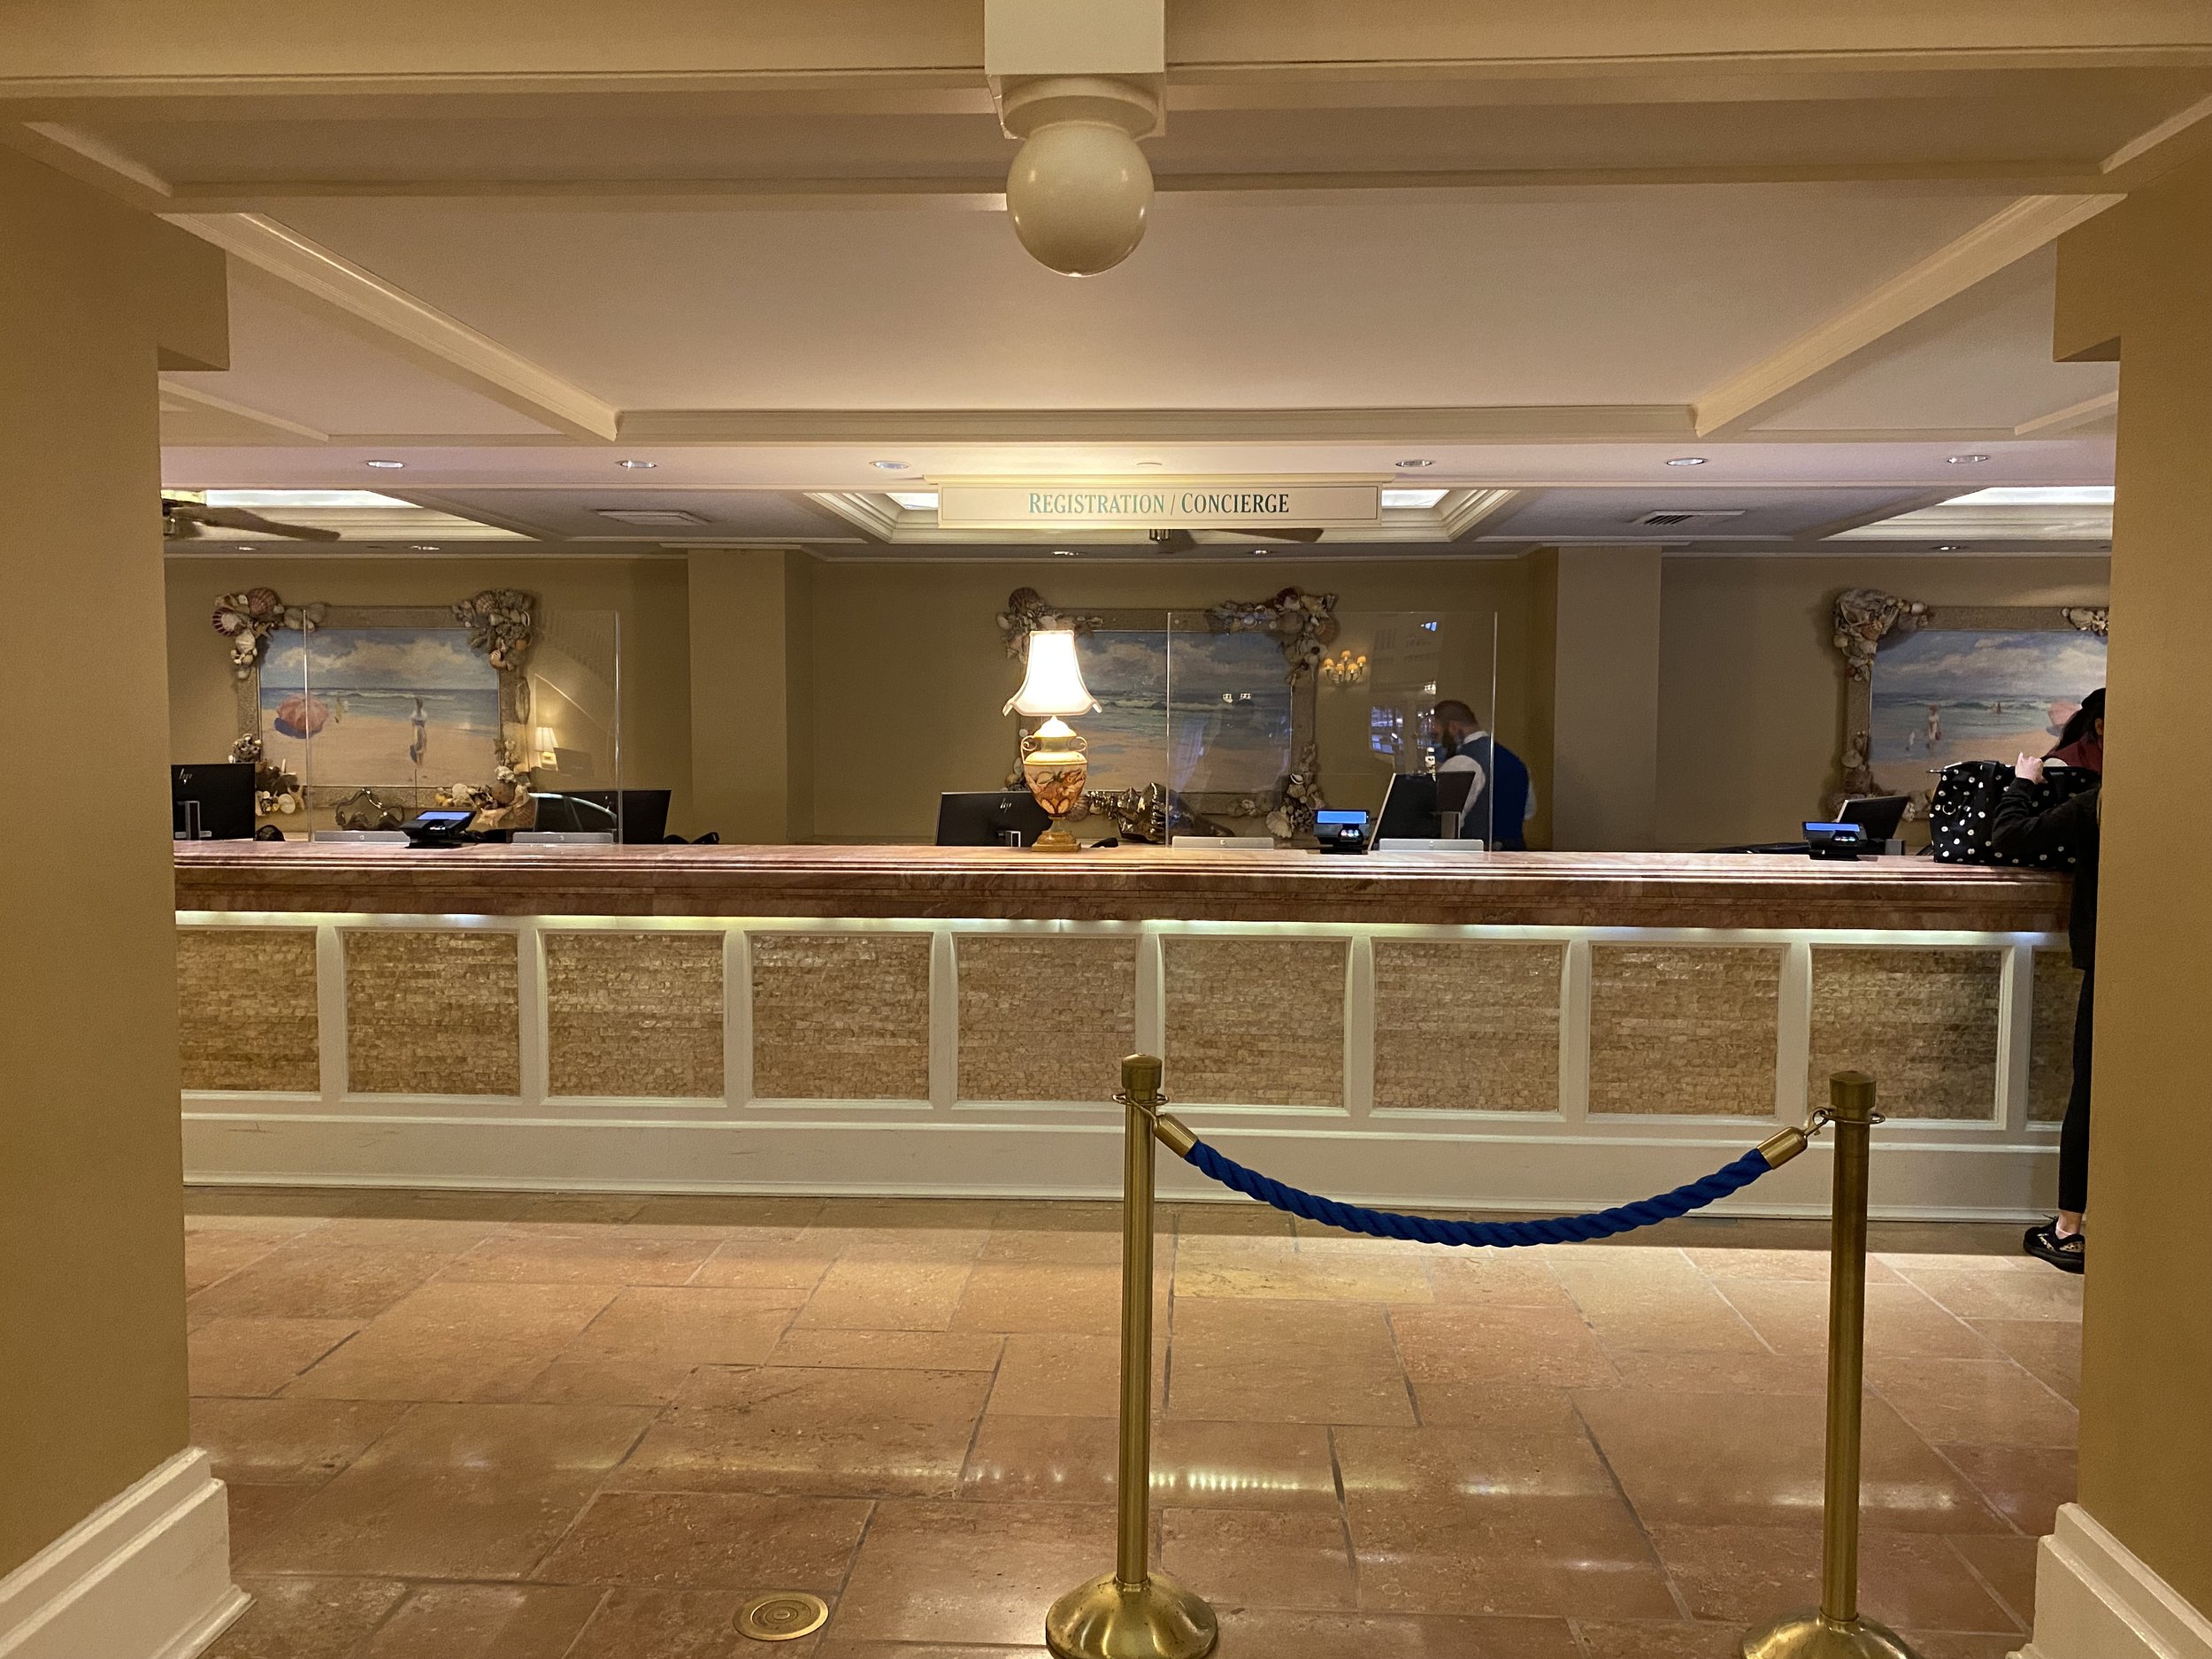  Most people are using Online Check In these days but you can still check in with a Cast Member if you prefer.     You’ll also find the lobby concierge desk here where a Cast Member will help you plan your itinerary and answer any questions you may h